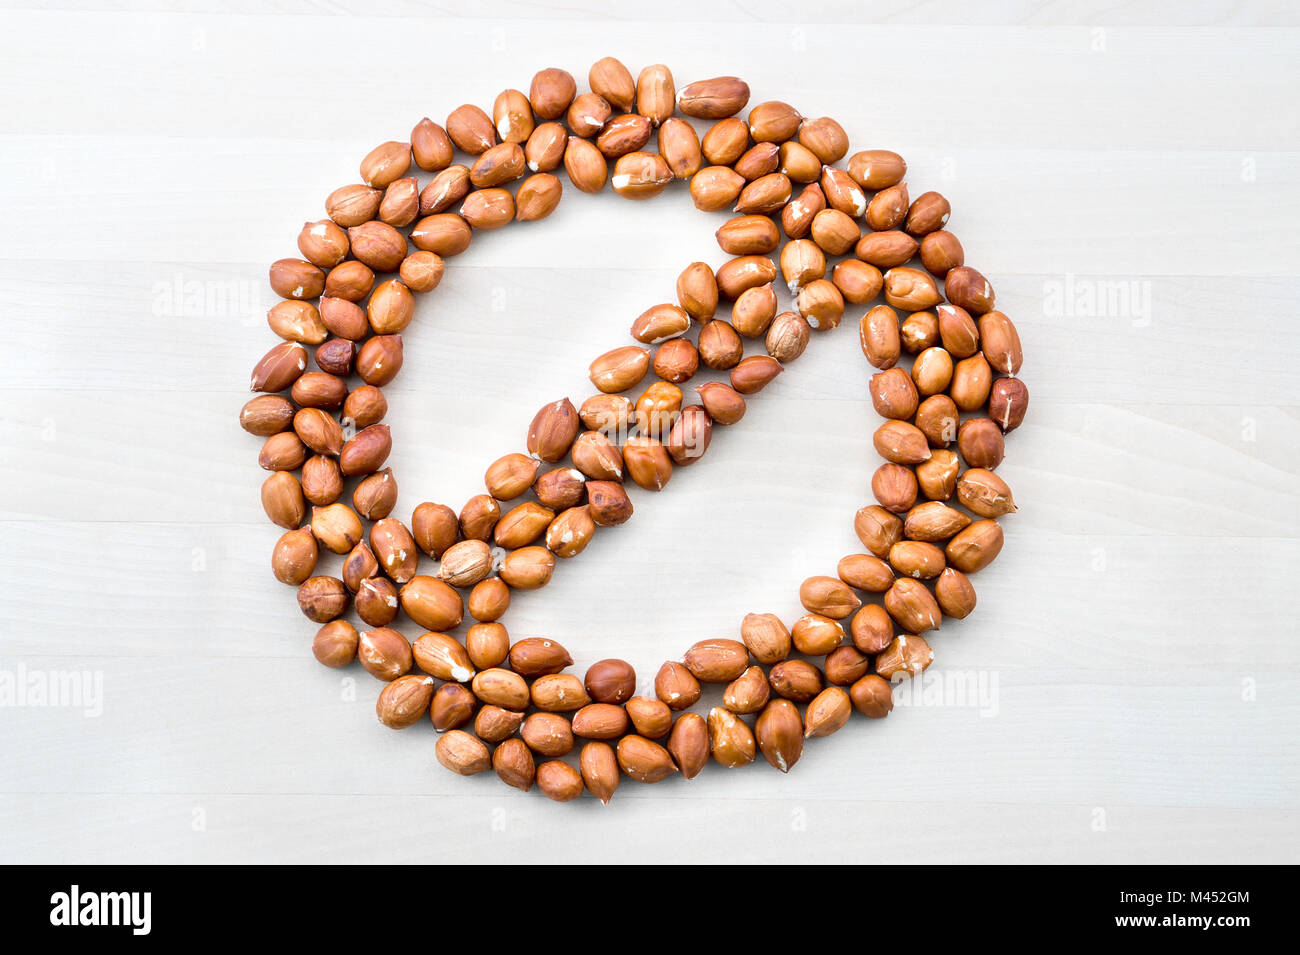 Peanut allergy. Stop, forbidden, prohibited and banned sign and symbol formed with nuts on white wooden table or board. No groundnuts for allergen. Stock Photo